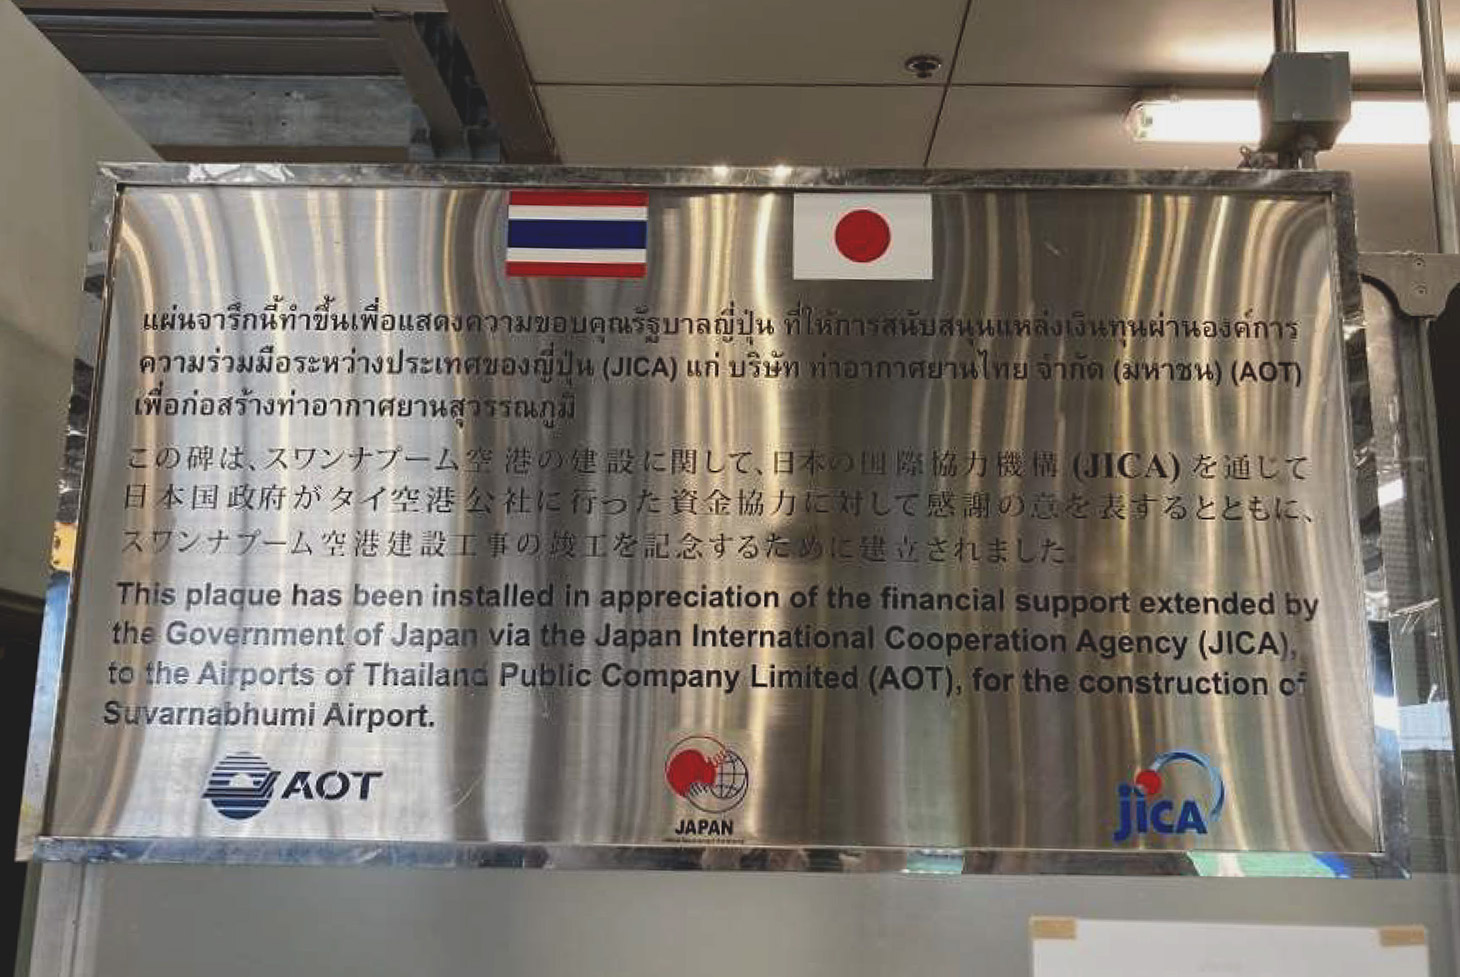 Plaque Installed at the Passenger Terminal Building to Commemorate the Assistance from Japan